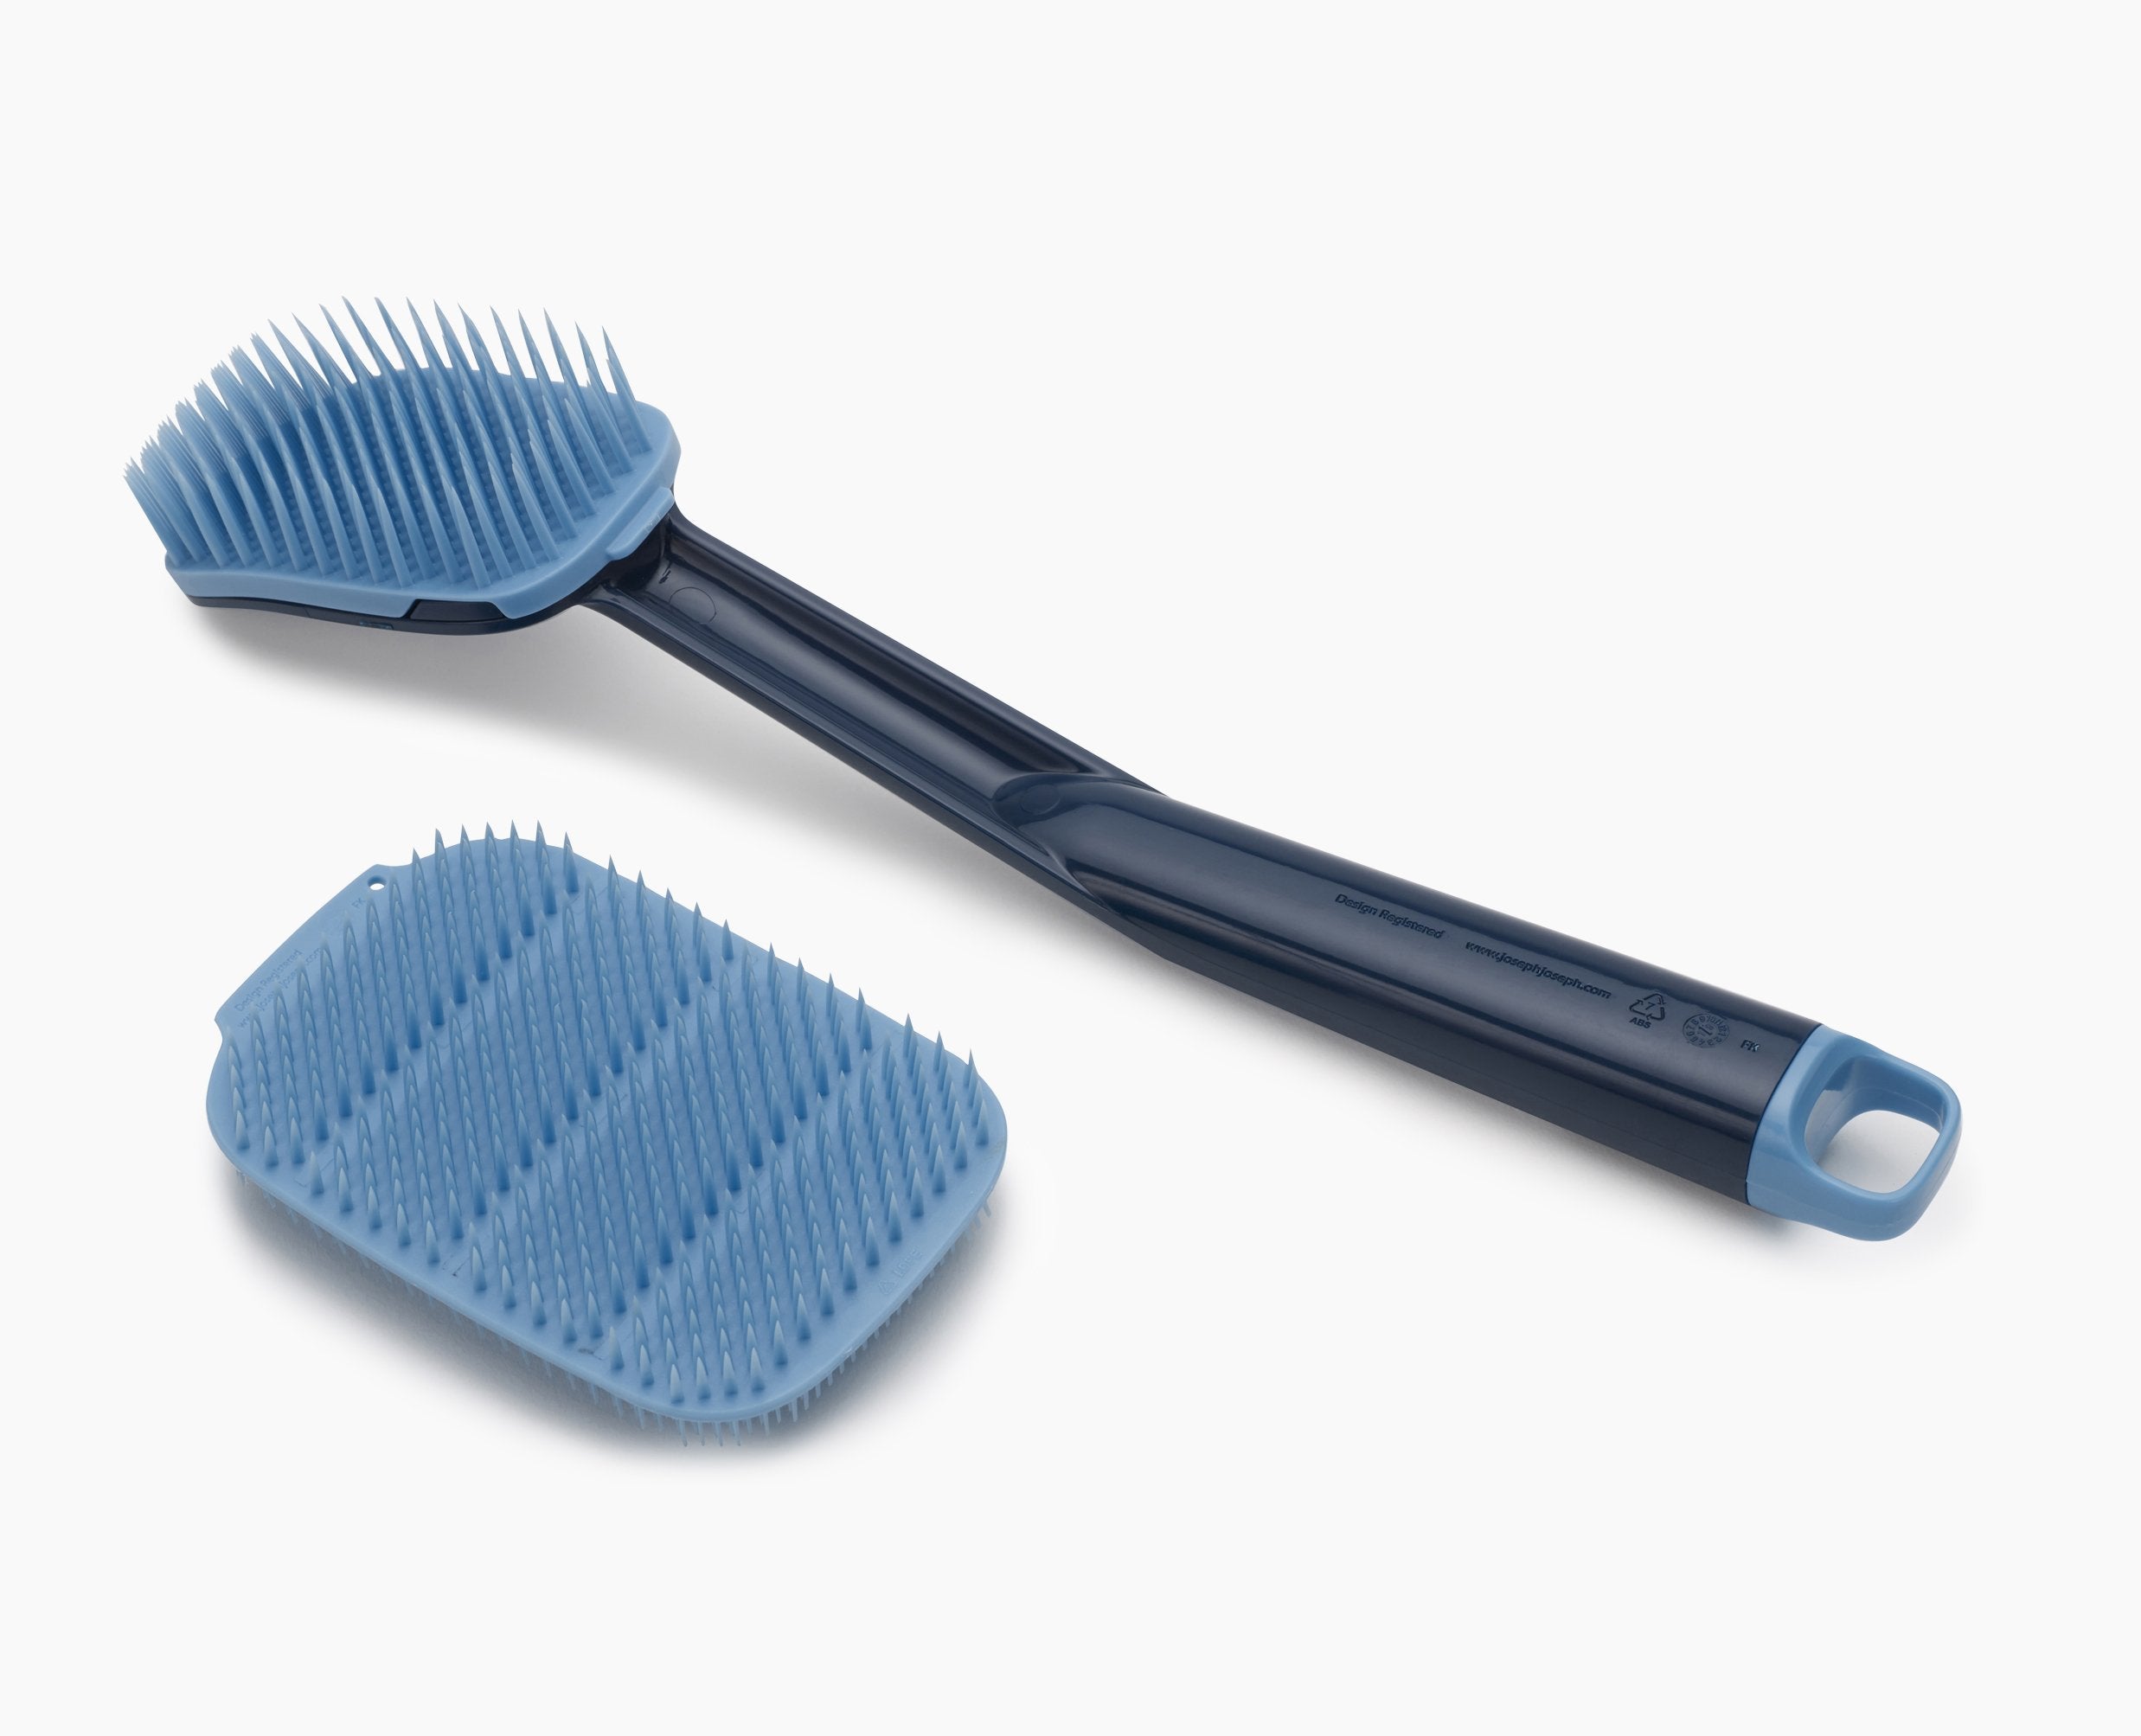 BEON.COM.AU  The innovative brush and scrubber in this 2-piece set feature advanced polymer bristles that dry quickly and are durable and flexible for effective cleaning.  Quick drying Scrubber features fine bristles on one side for gentle cleaning tasks and coarse bristles on the other for tougher deposits ... Joseph Joseph at BEON.COM.AU